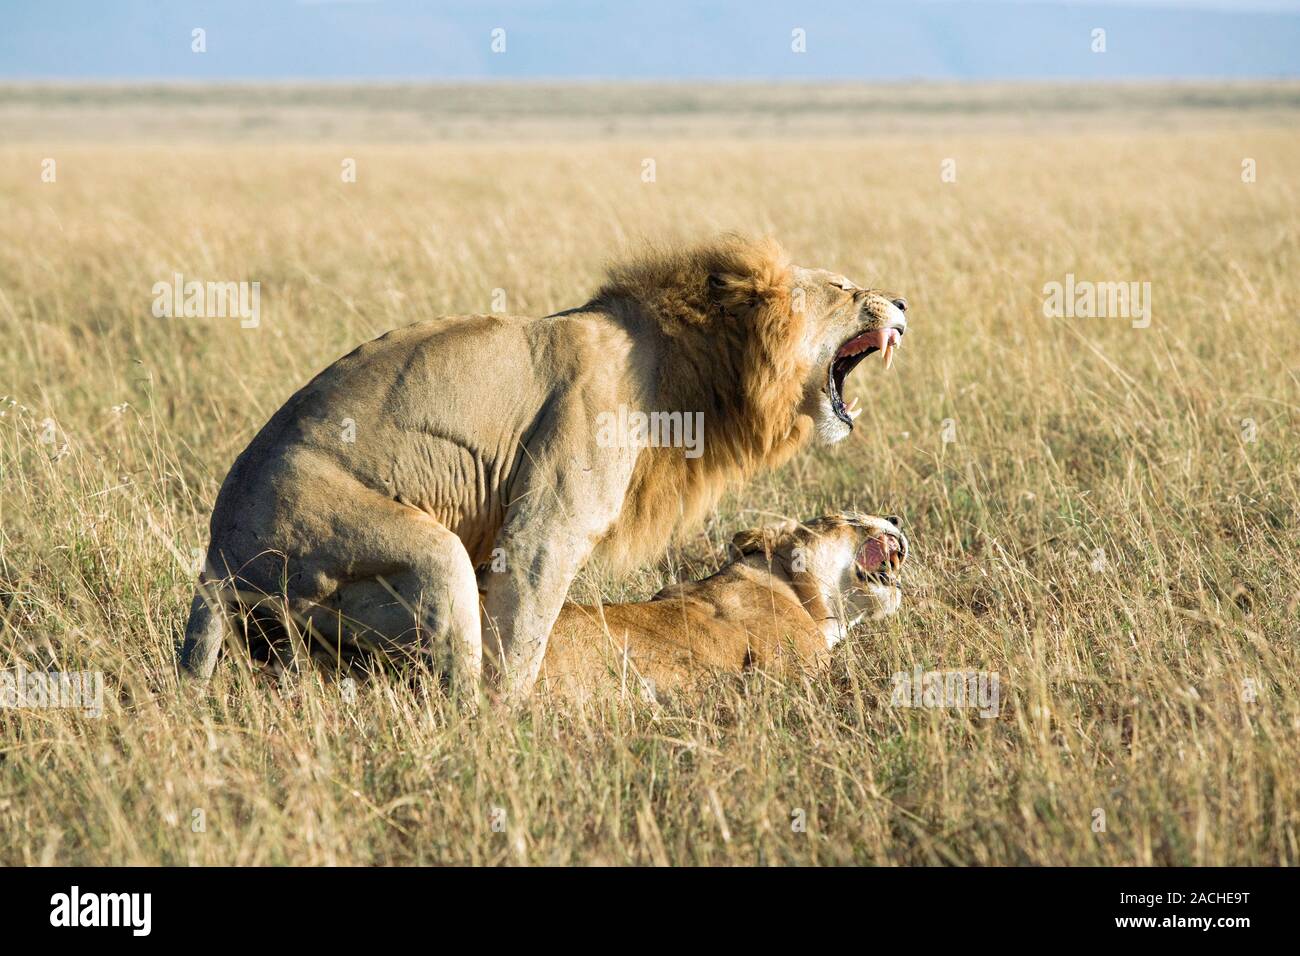 Lion mating with wolf